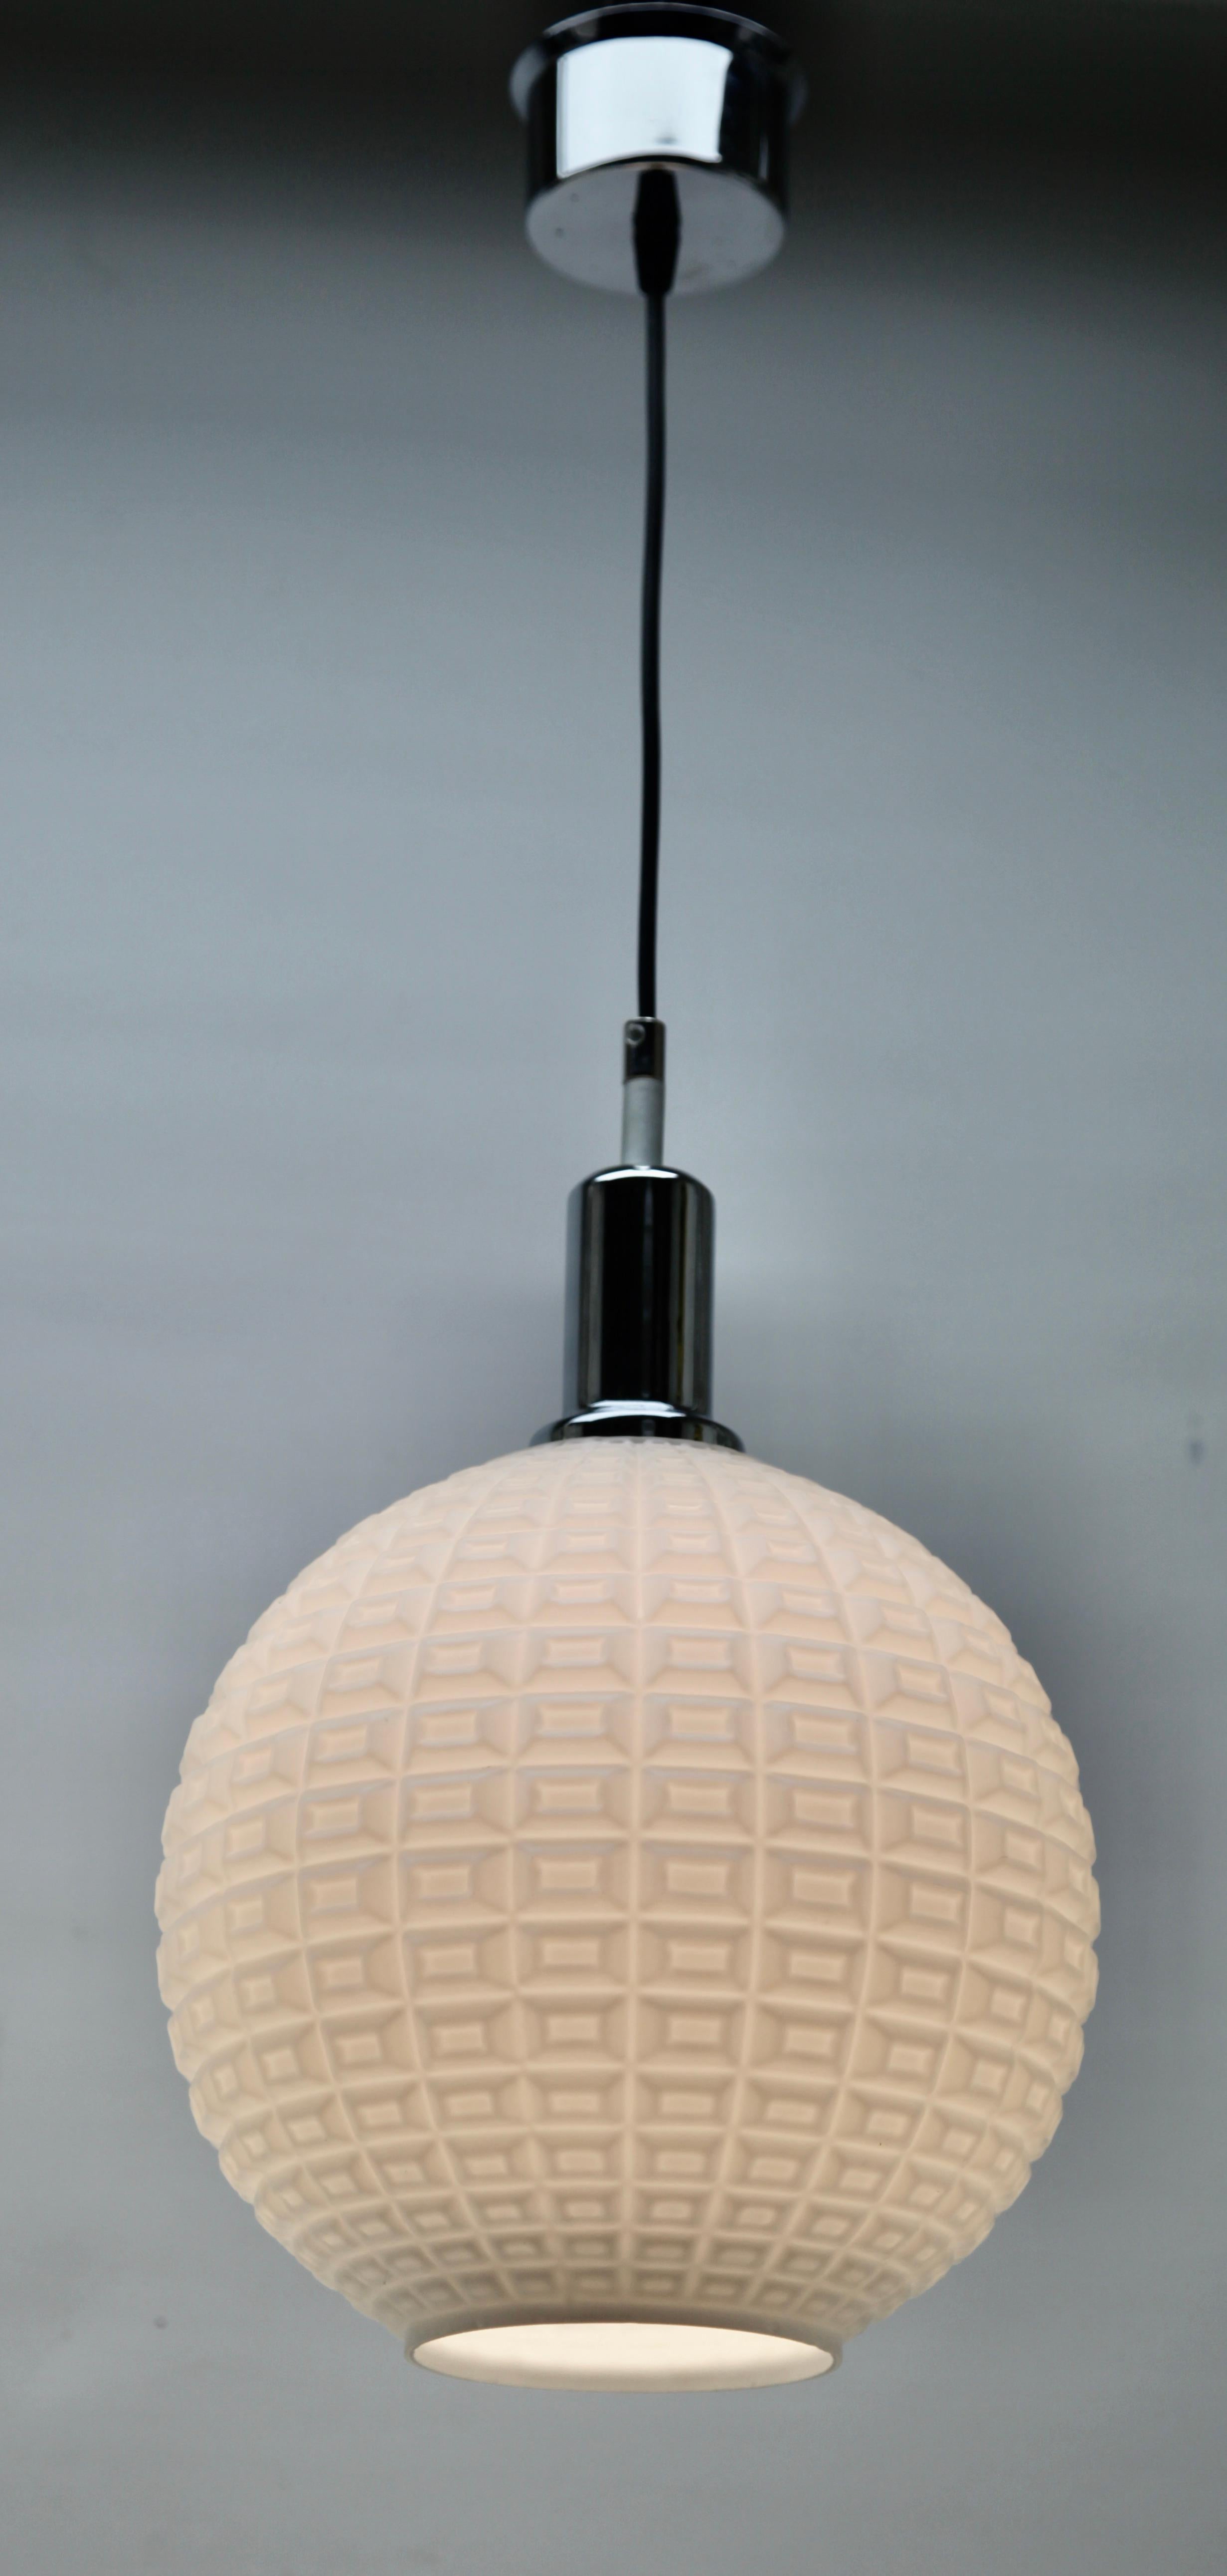 Hanging pendant light from the late 1960s on an adjustable cable, designed in the Scandinavian style and an opaline shade. Its Classic modernist form and simplicity in design, make it an iconic example of midcentury home lighting.
Size shade: